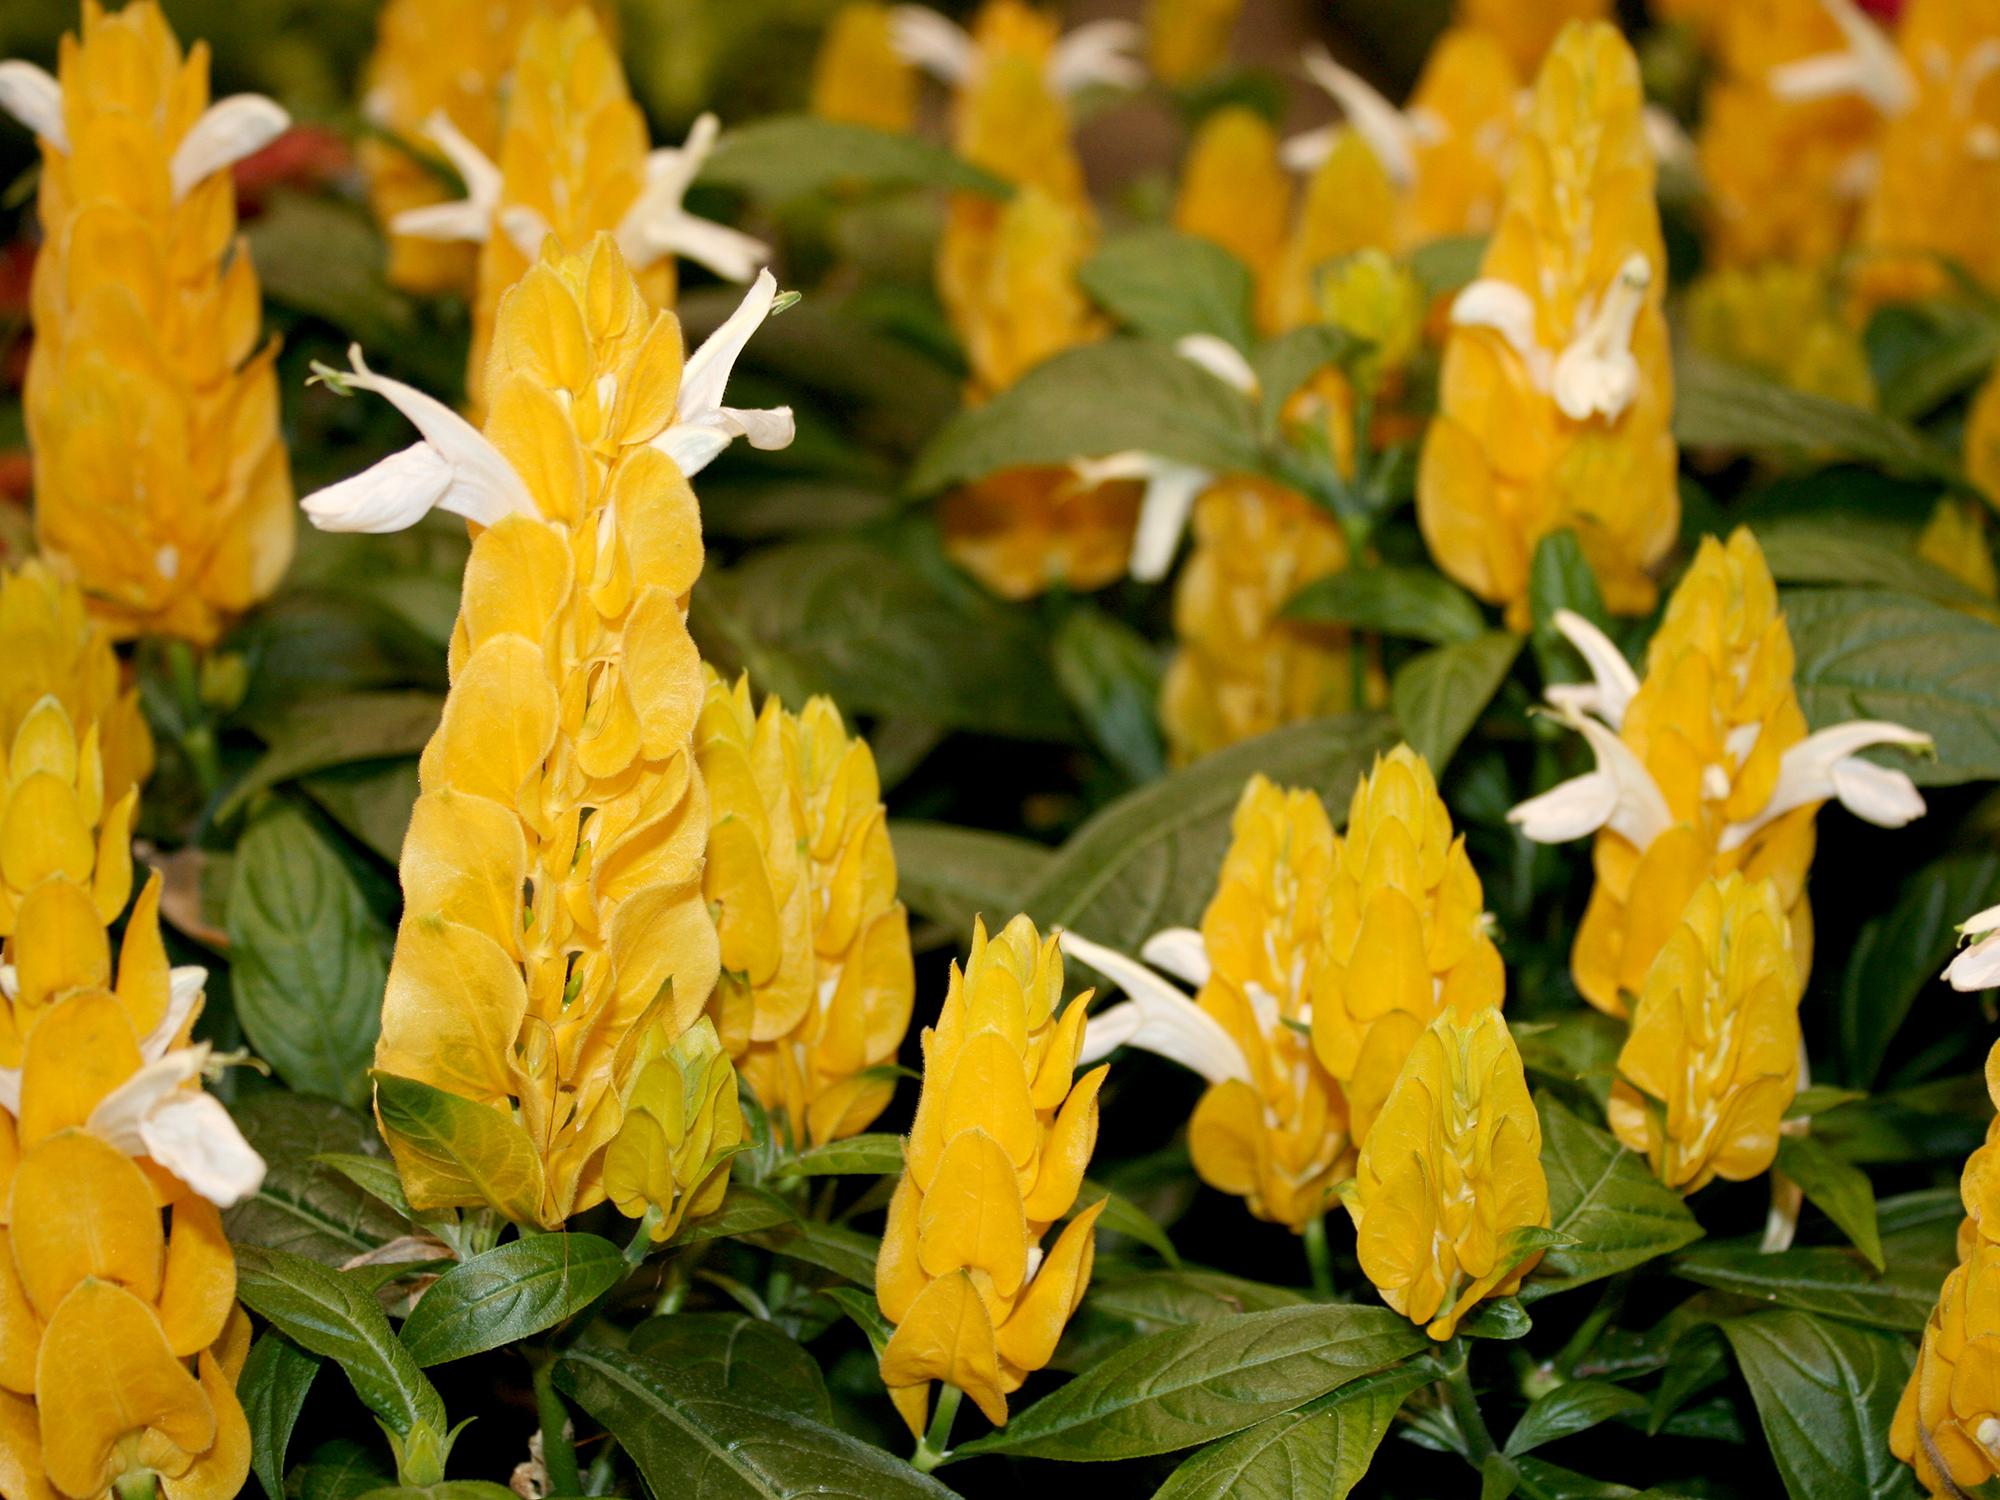 The yellow shrimp plant is easy to grow and will bloom all summer long. Plant and grow the plants where they can receive full morning sun but get some shade for protection from afternoon sunlight. (Photo by MSU Extension/Gary Bachman)